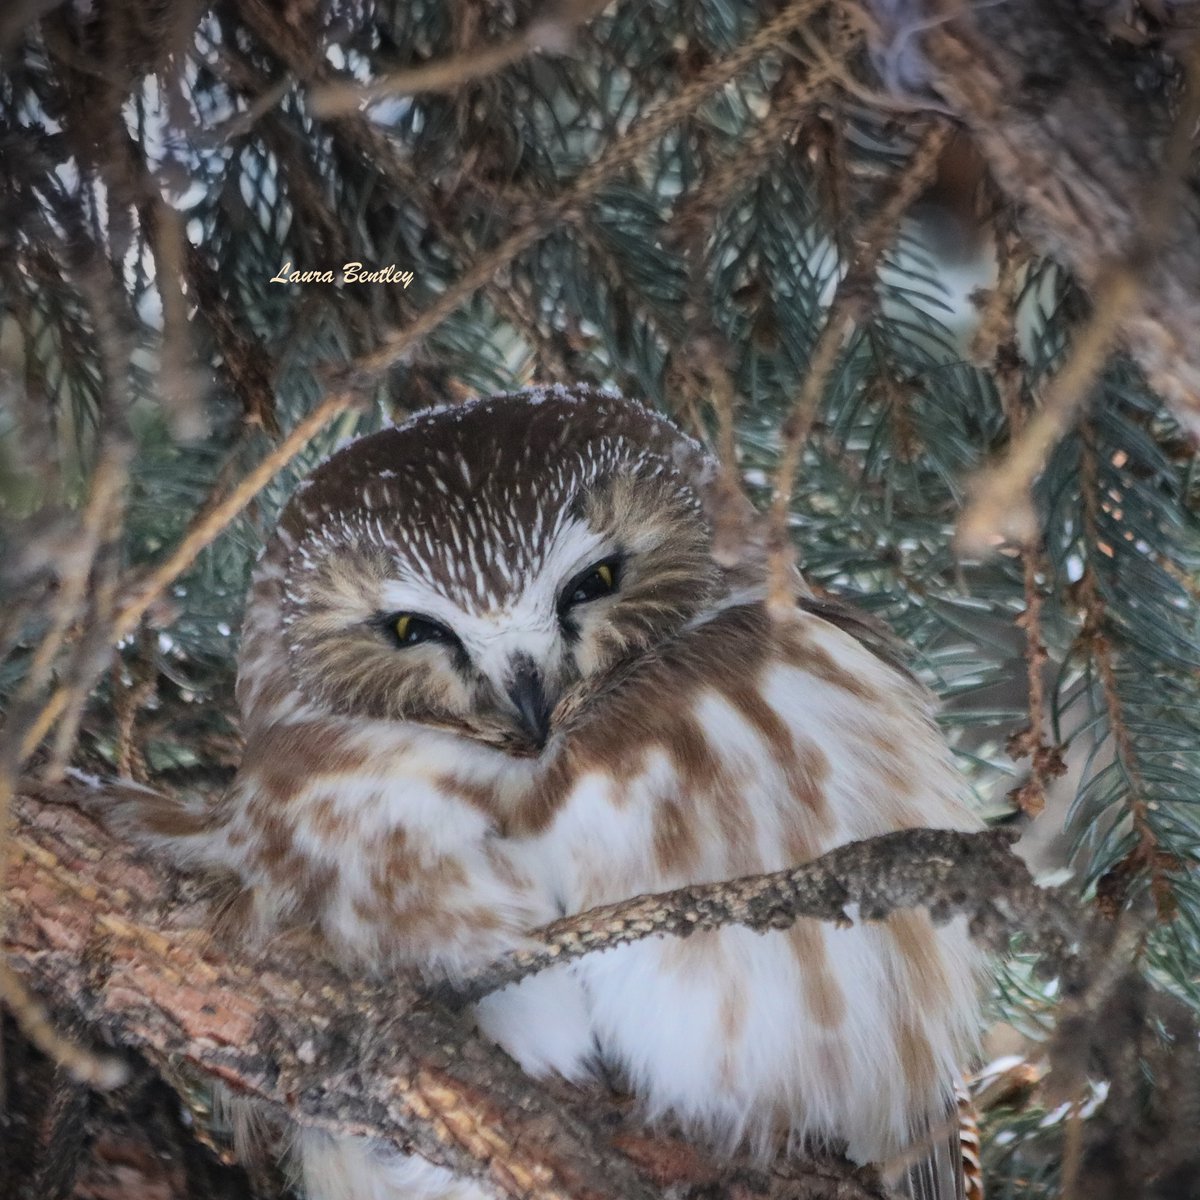 It's -24c at my house & it's #ChristmasBirdCount day. 
1 frosty cutie #northernsawwhetowl sitting where I captured him/her the other day, but no mouse today that I could see.